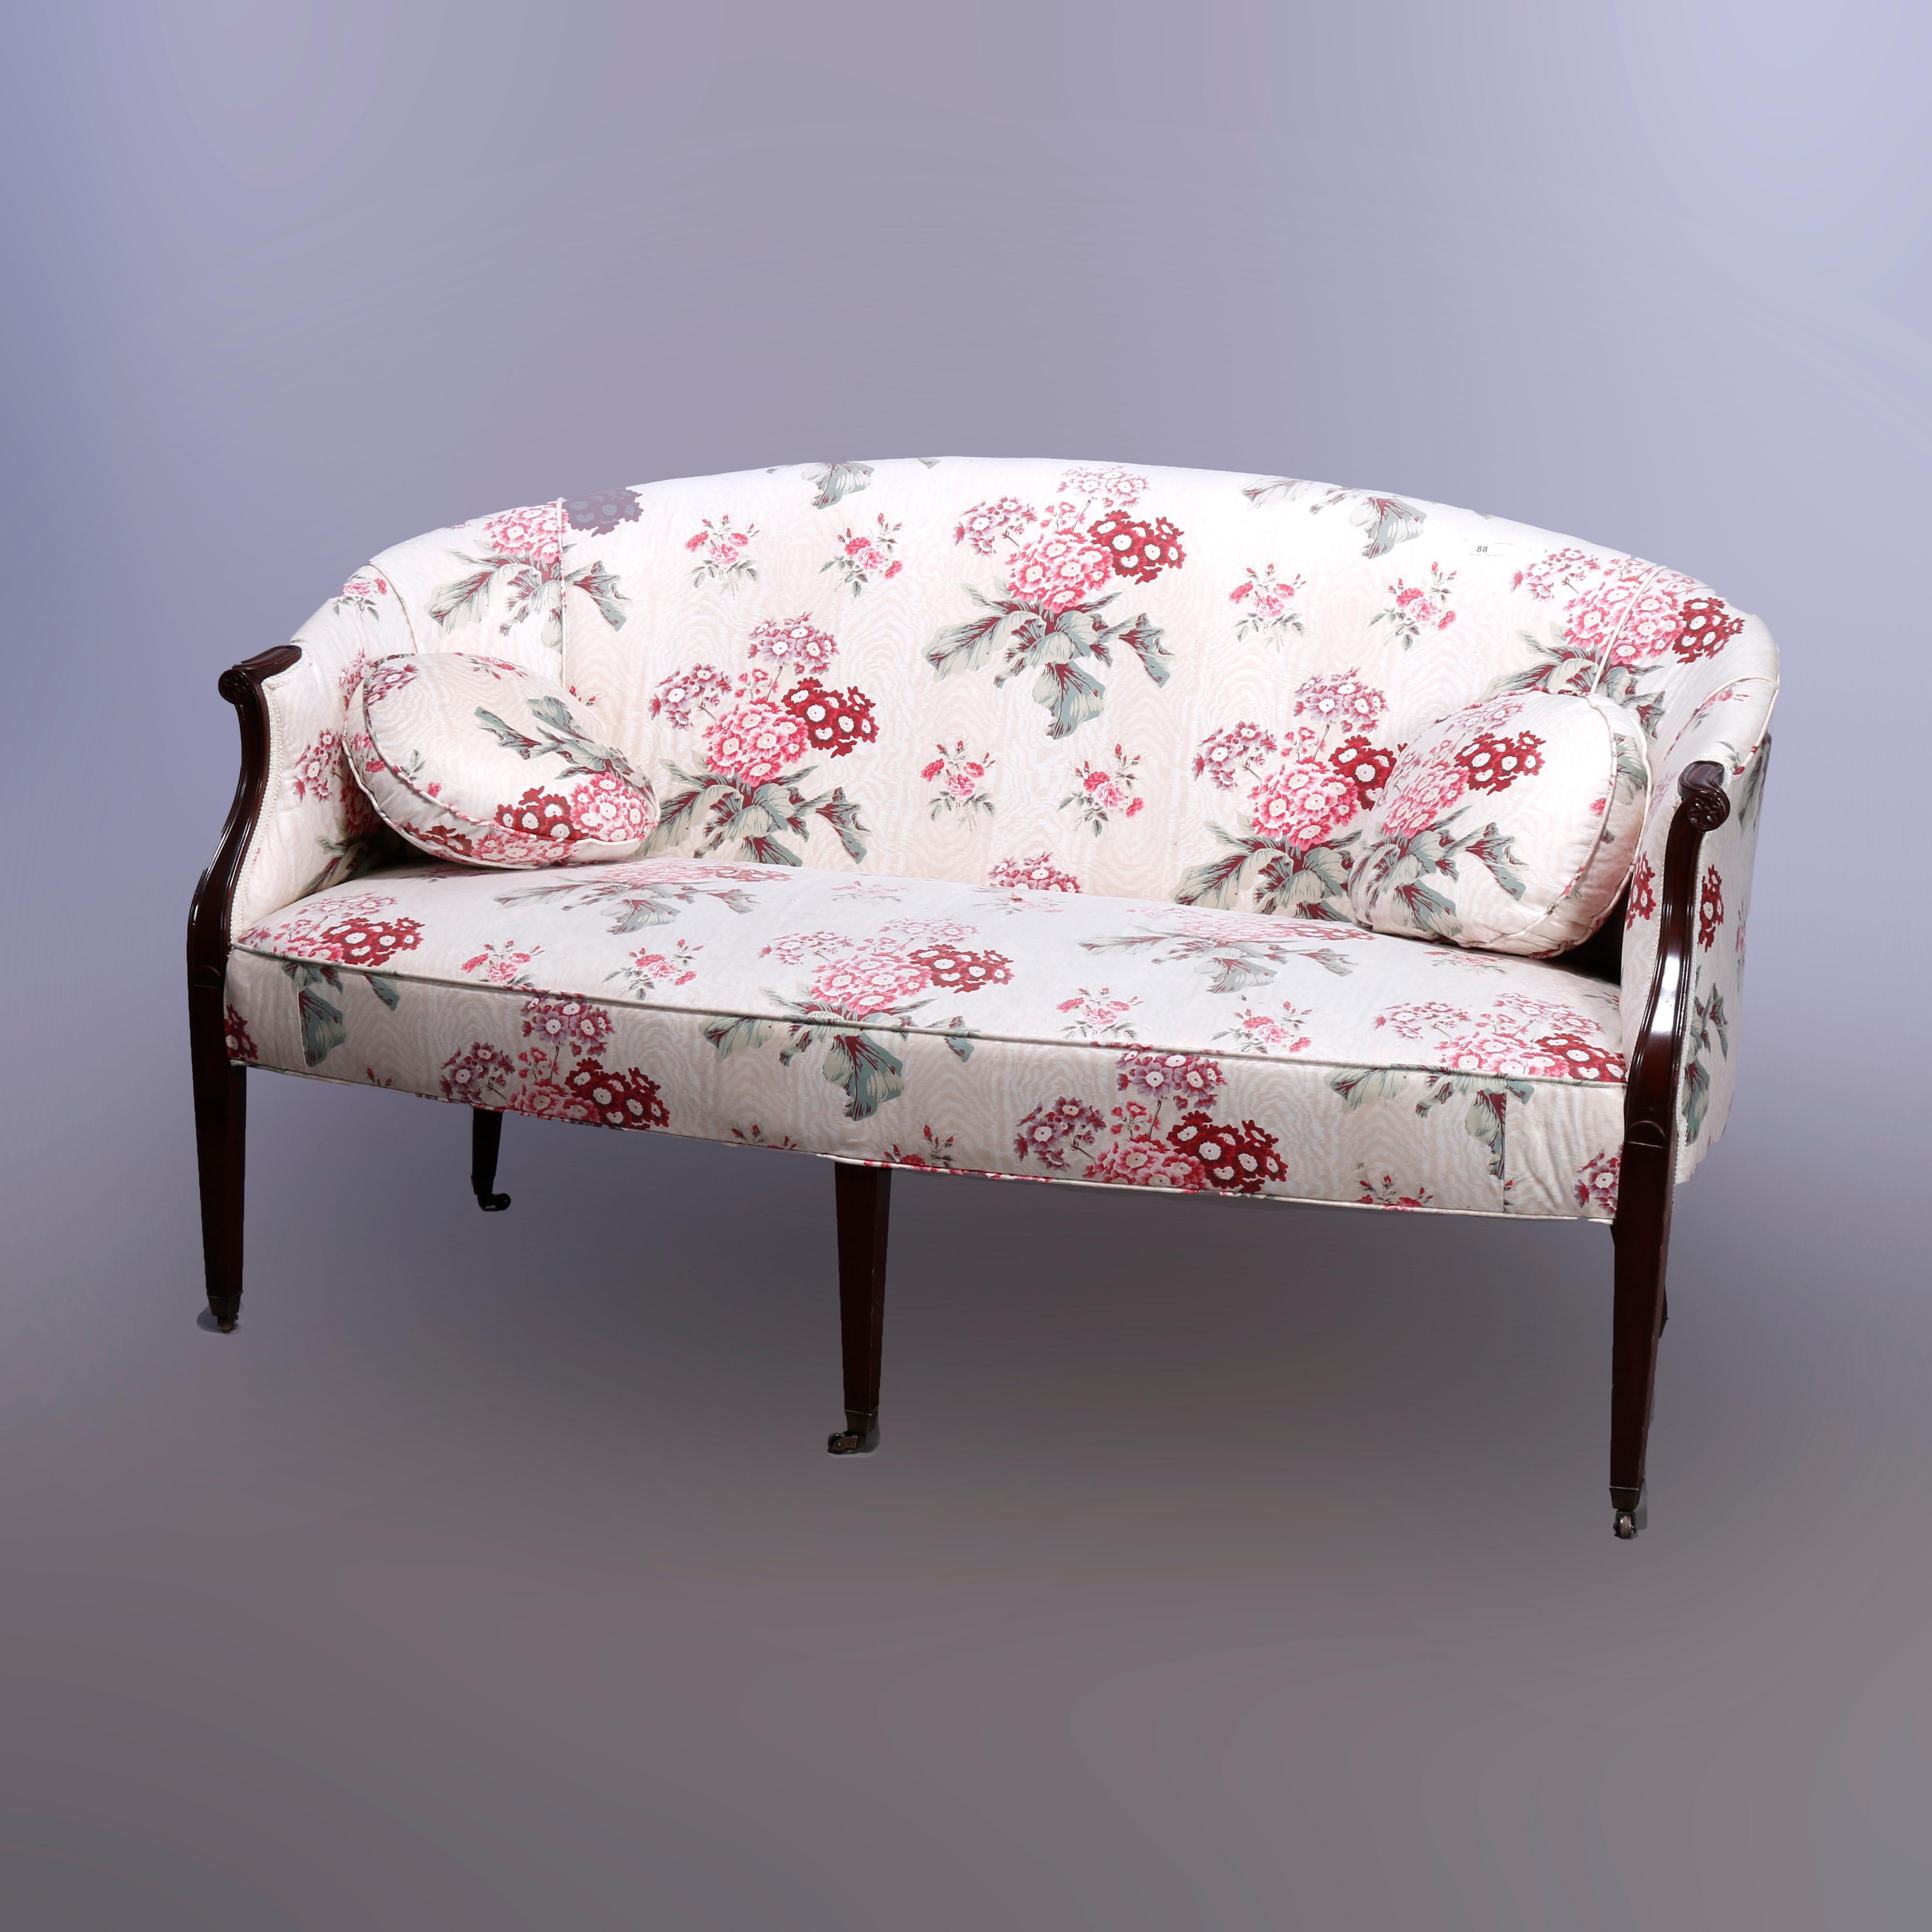 An antique Hepplewhite style settee offers arched and curved back with mahogany frame having scroll arms with carved rosettes and raised on square and tapered legs, floral upholstered, c1930
 
Measures - 34.5''H x 61''W x 33''D; seat height